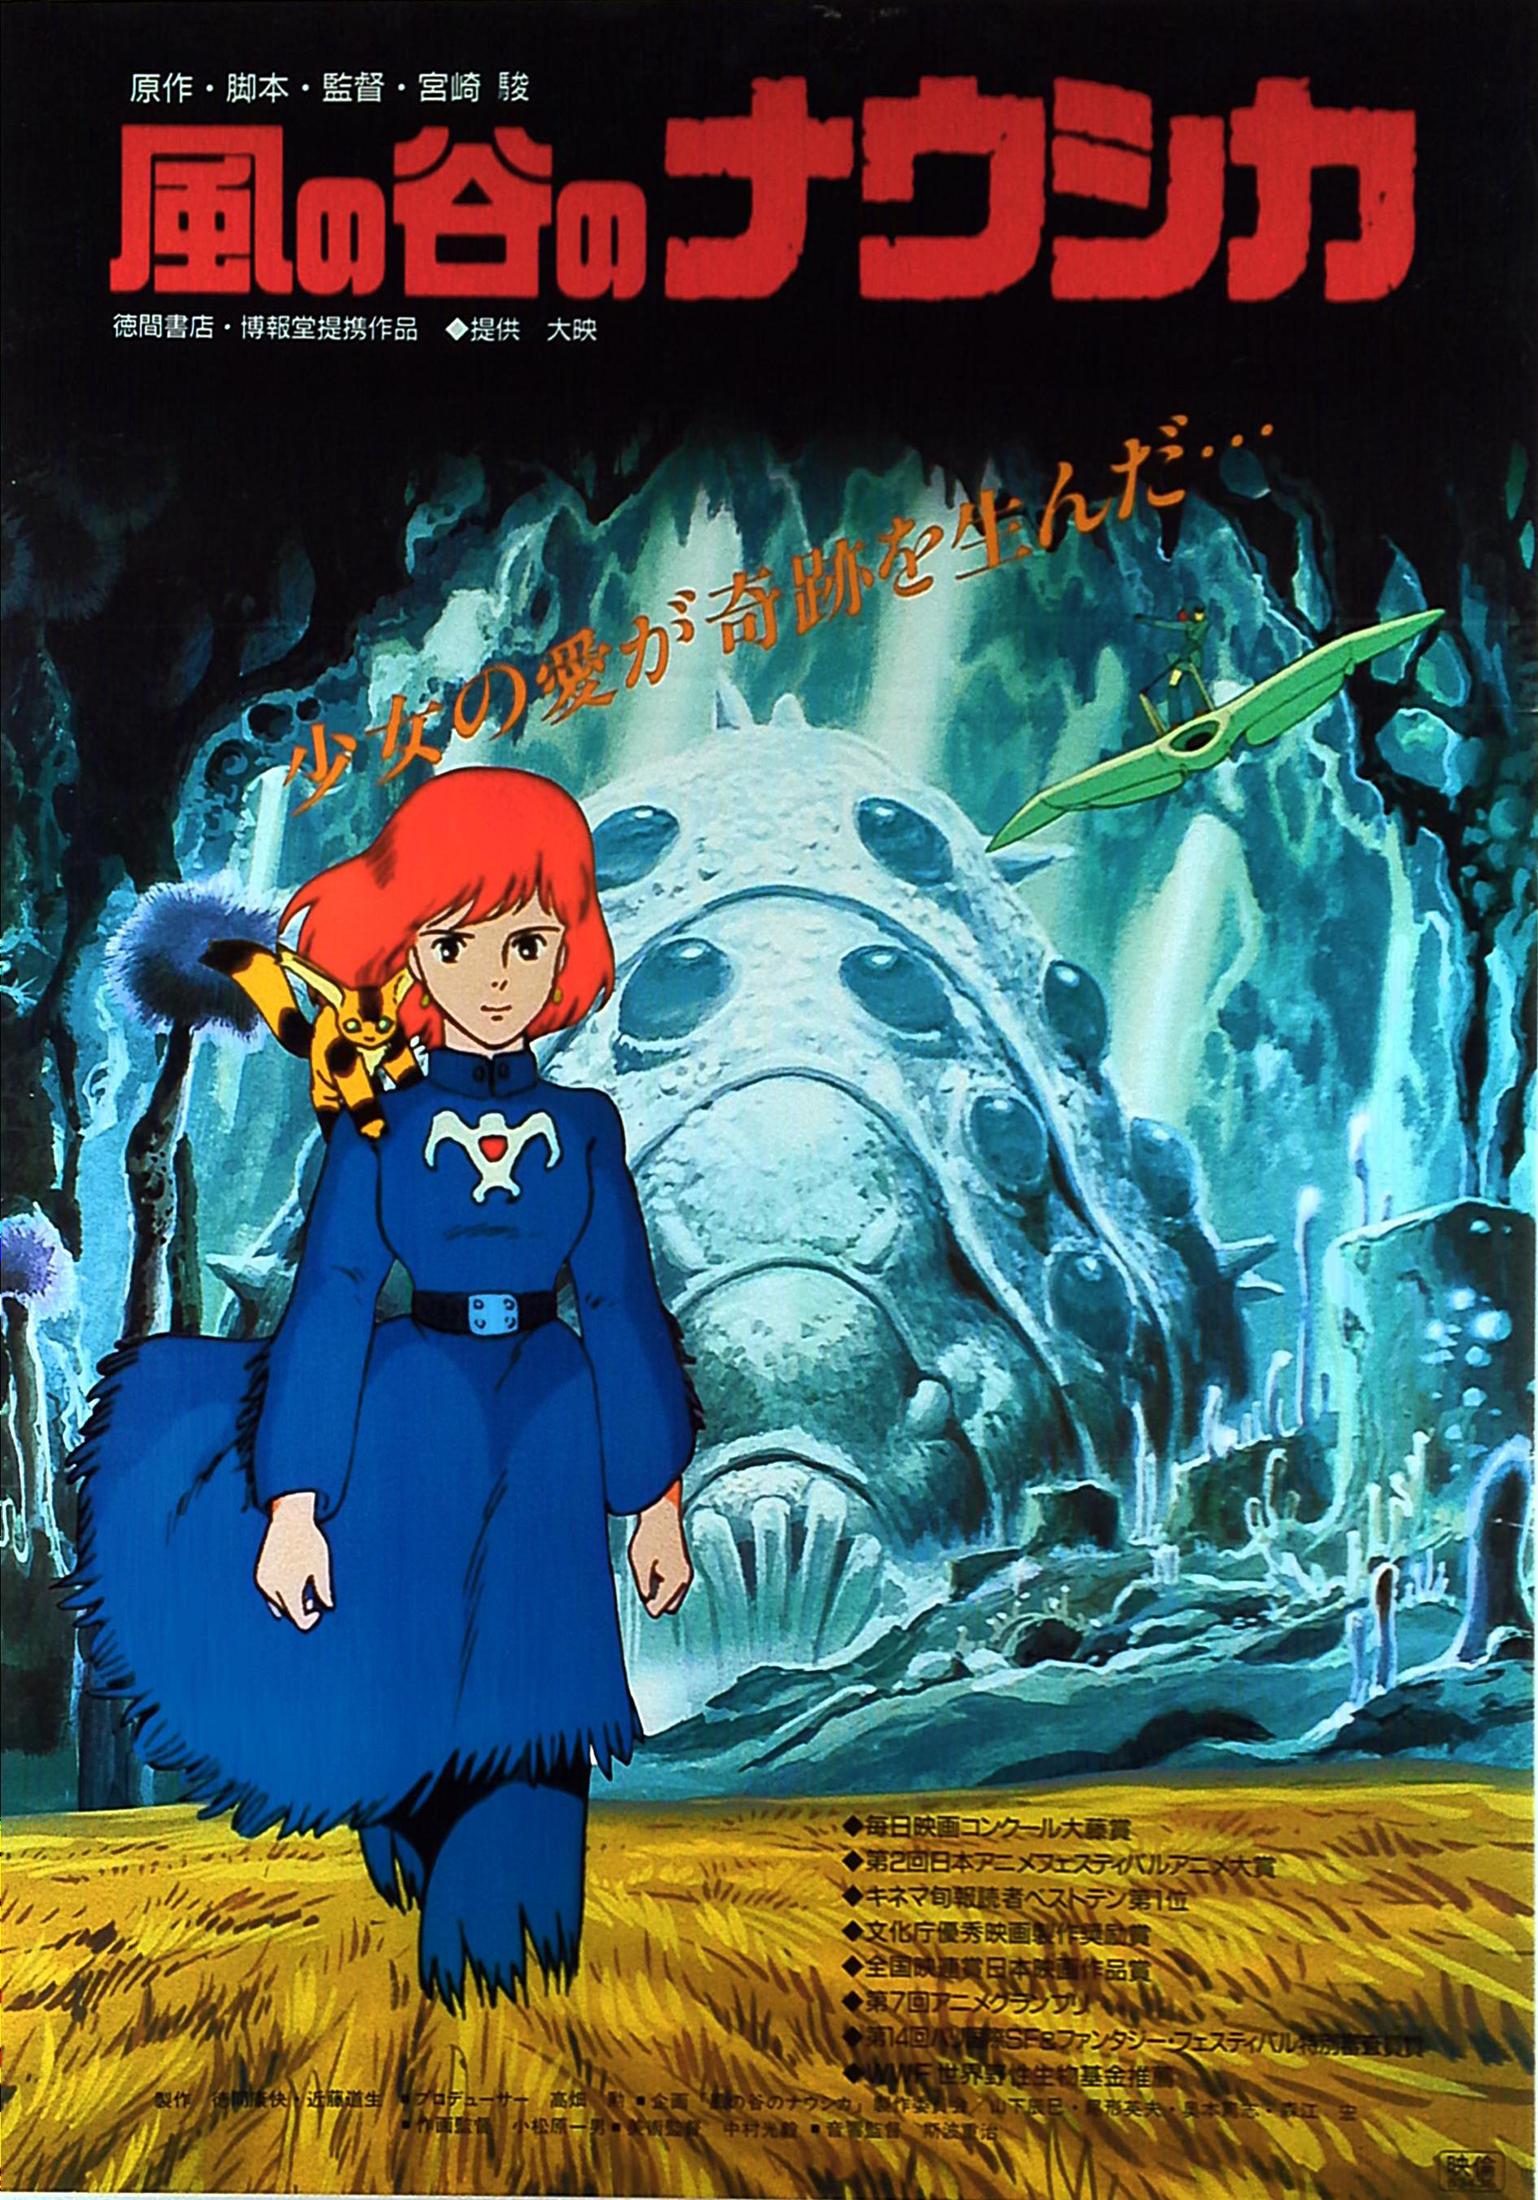 Nausicaa of the Valley of the Wind Original Vintage Poster, Hayao Miyazaki 1984 - Print by Unknown